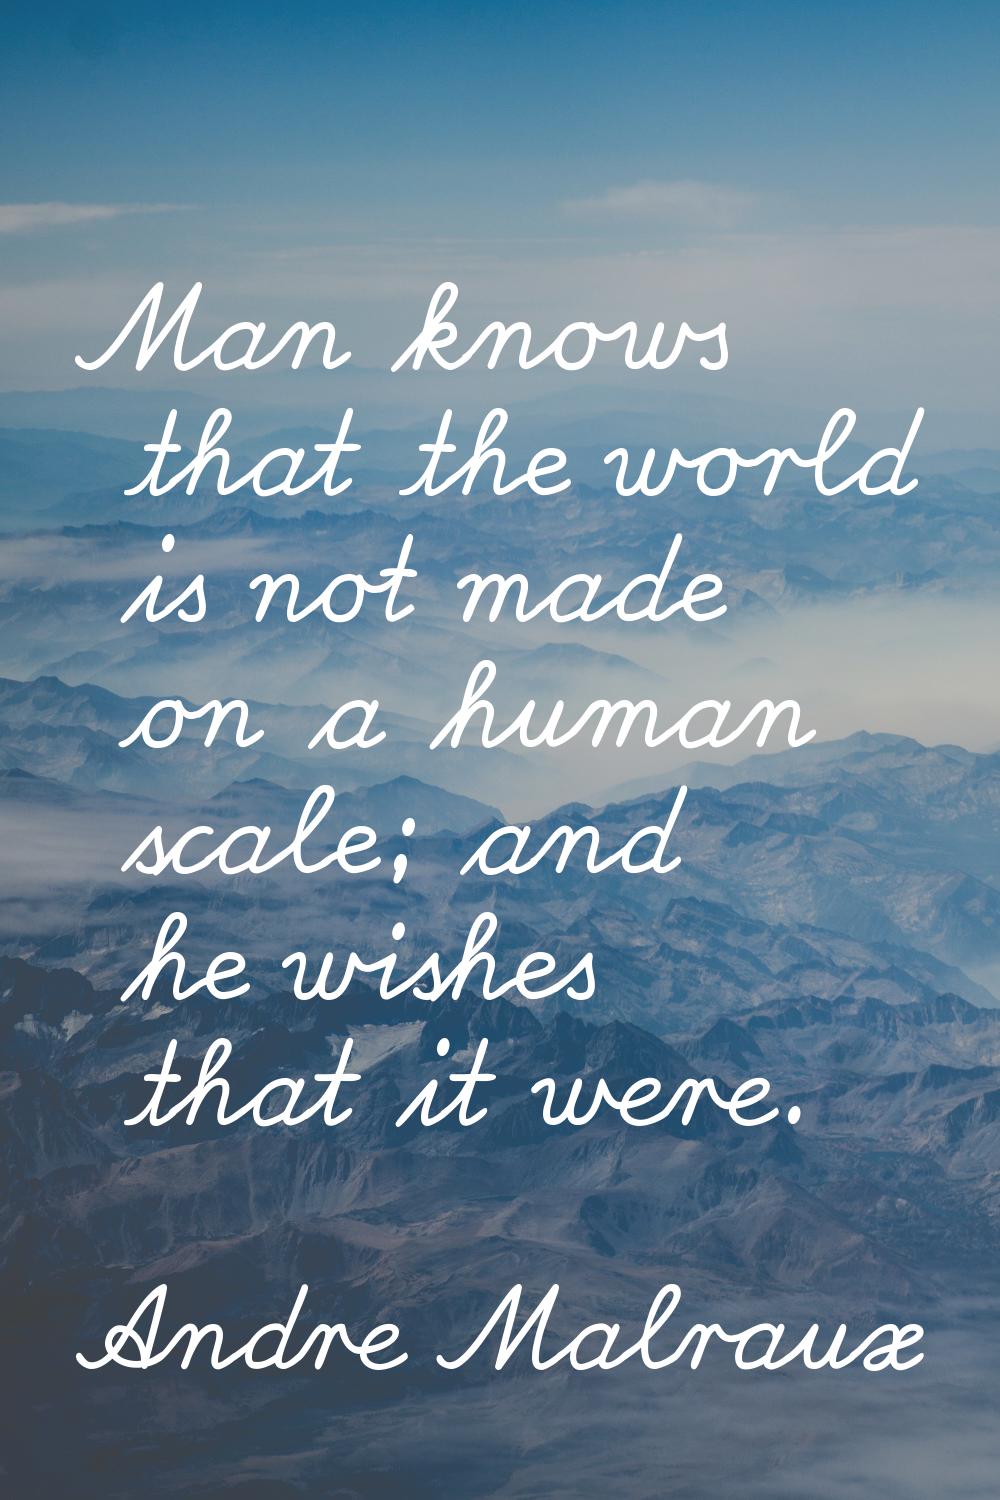 Man knows that the world is not made on a human scale; and he wishes that it were.